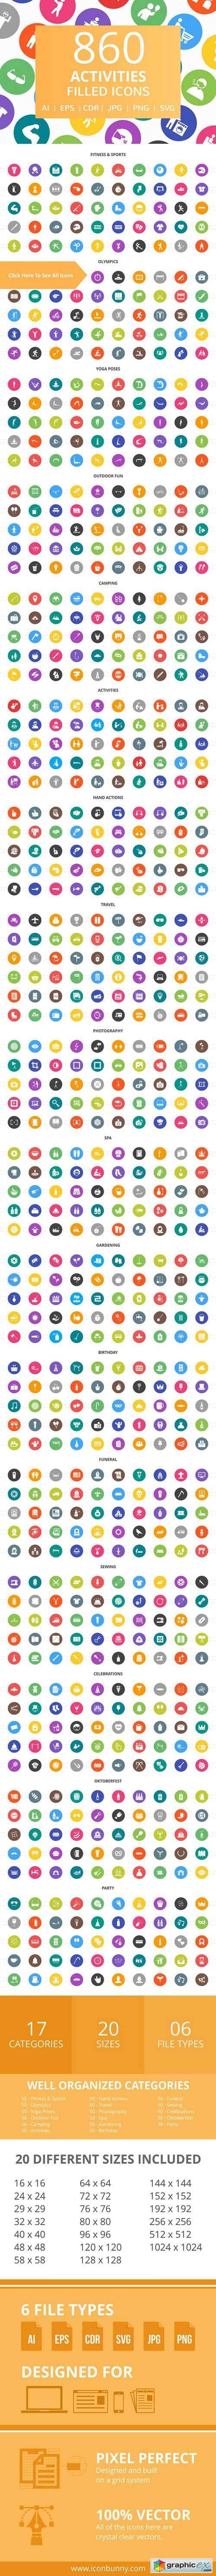 860 Activities Filled Round Icons